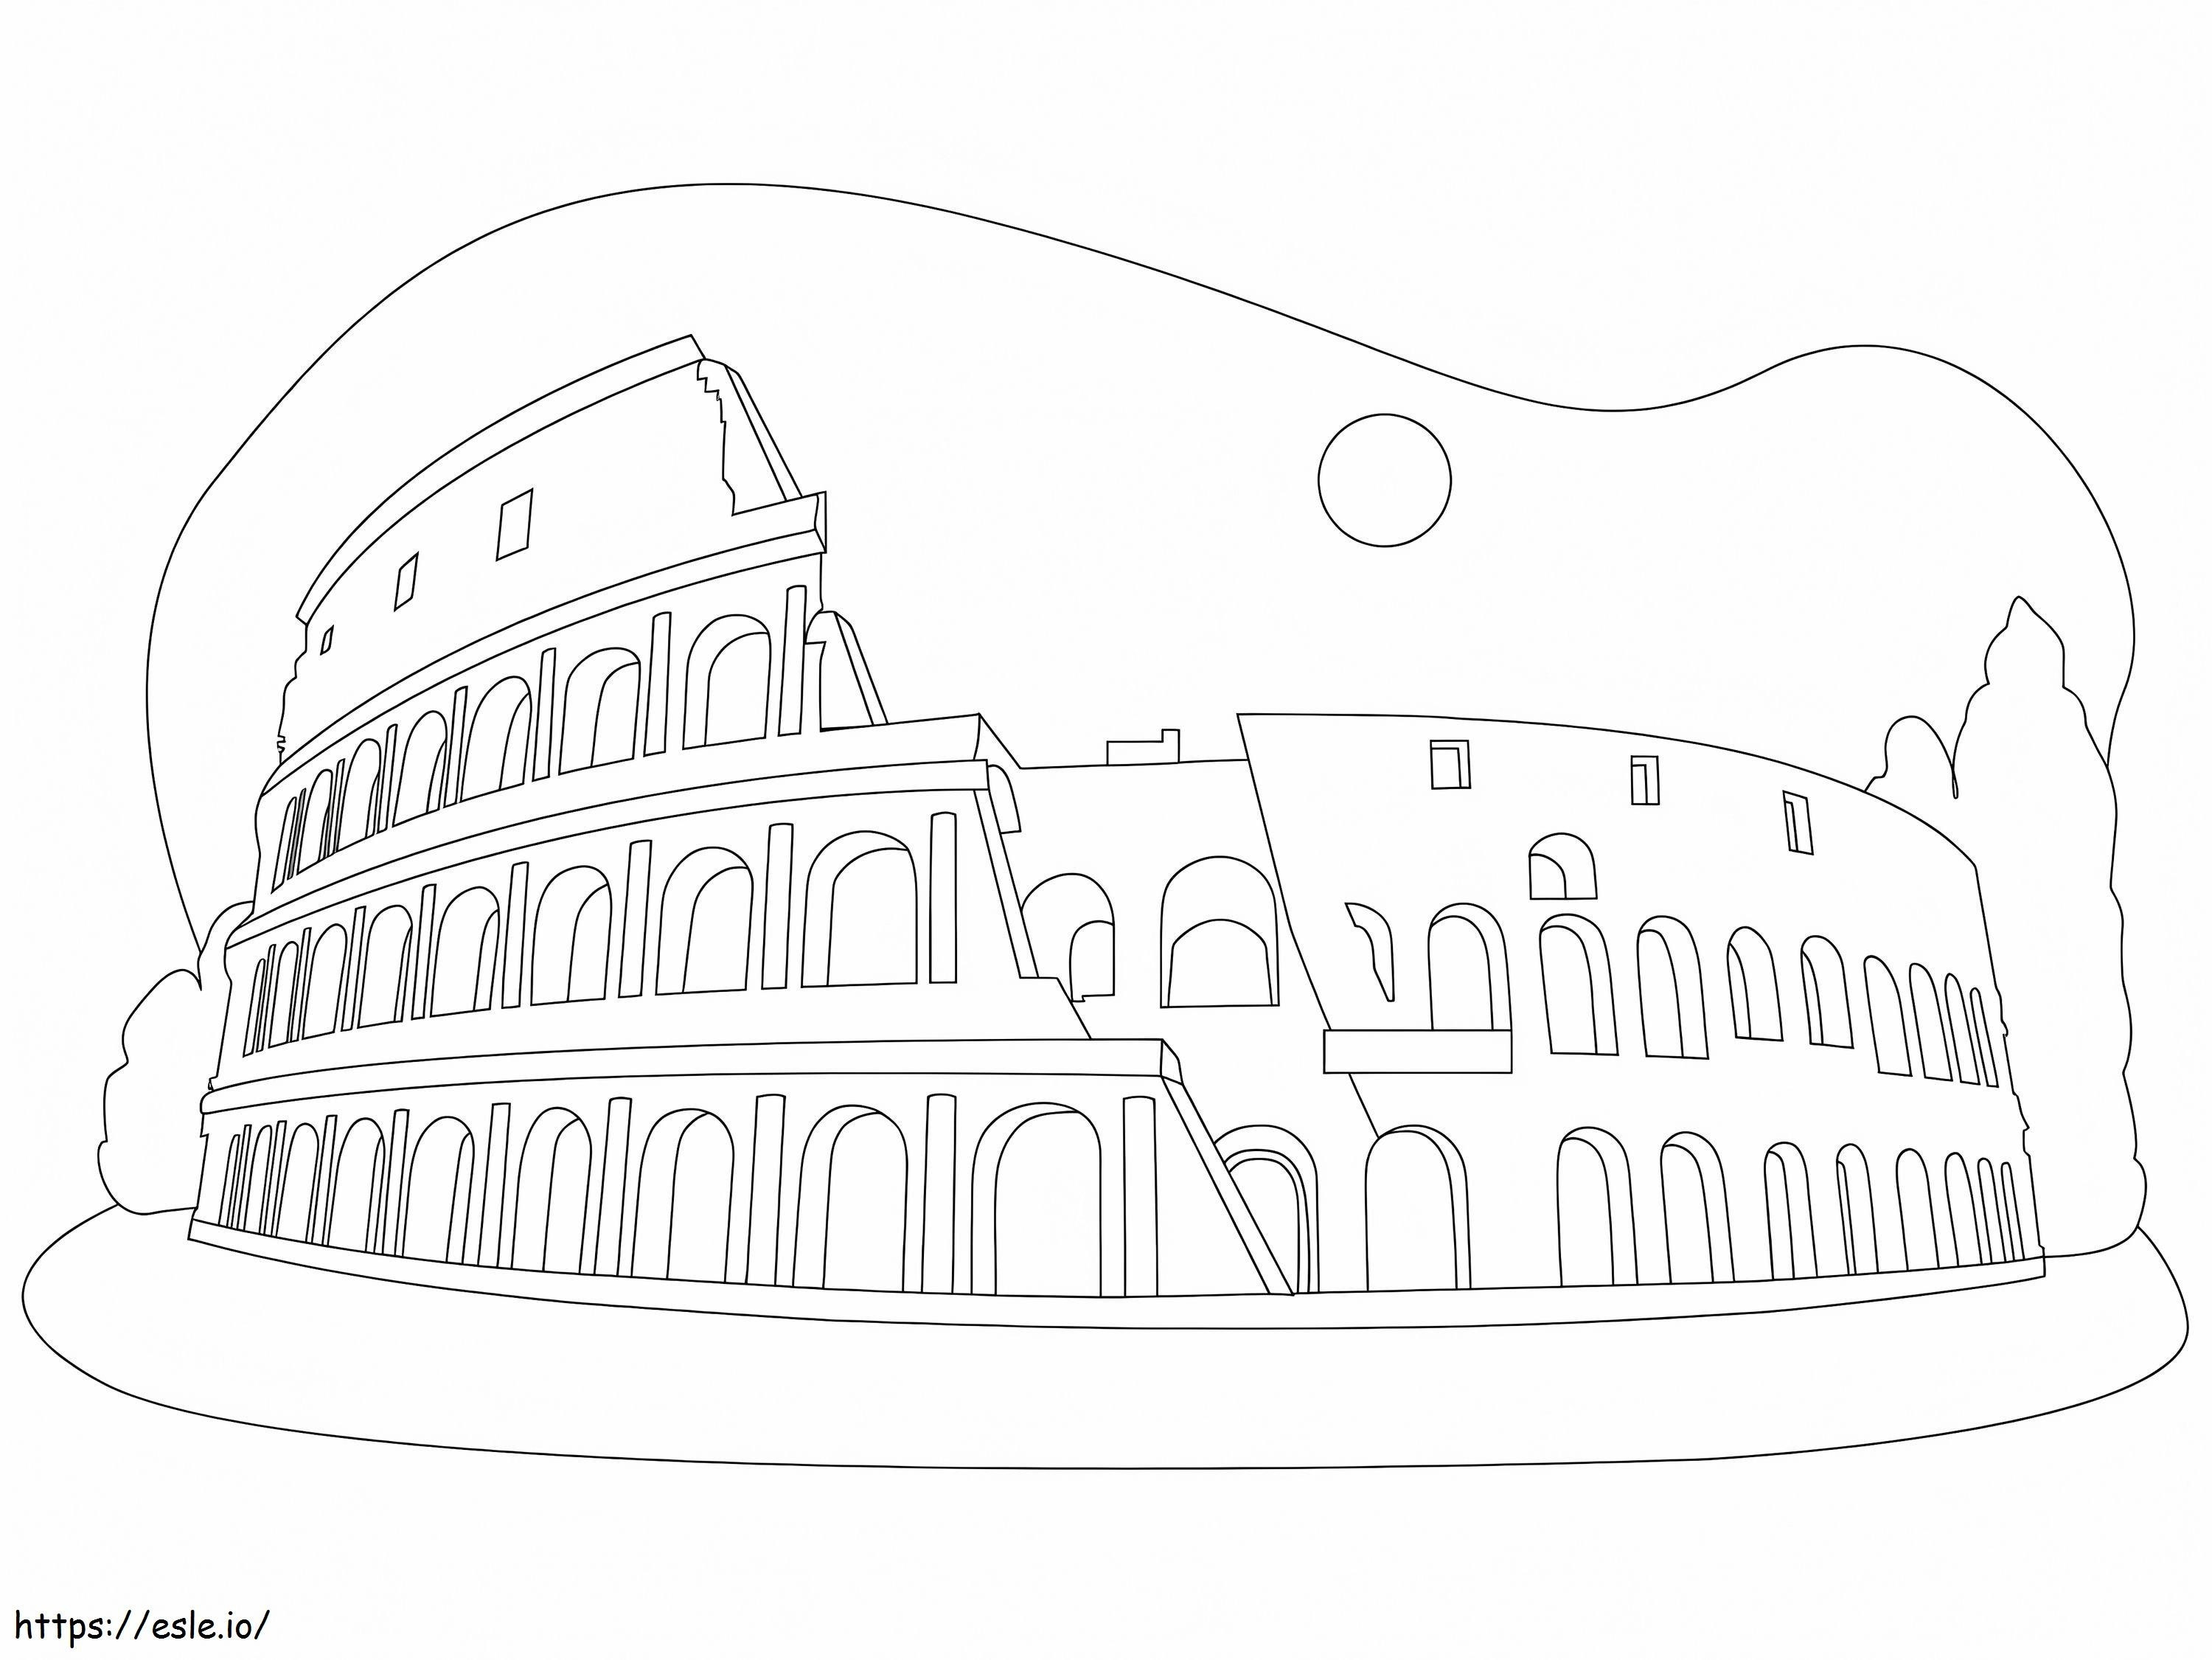 The Colosseum coloring page